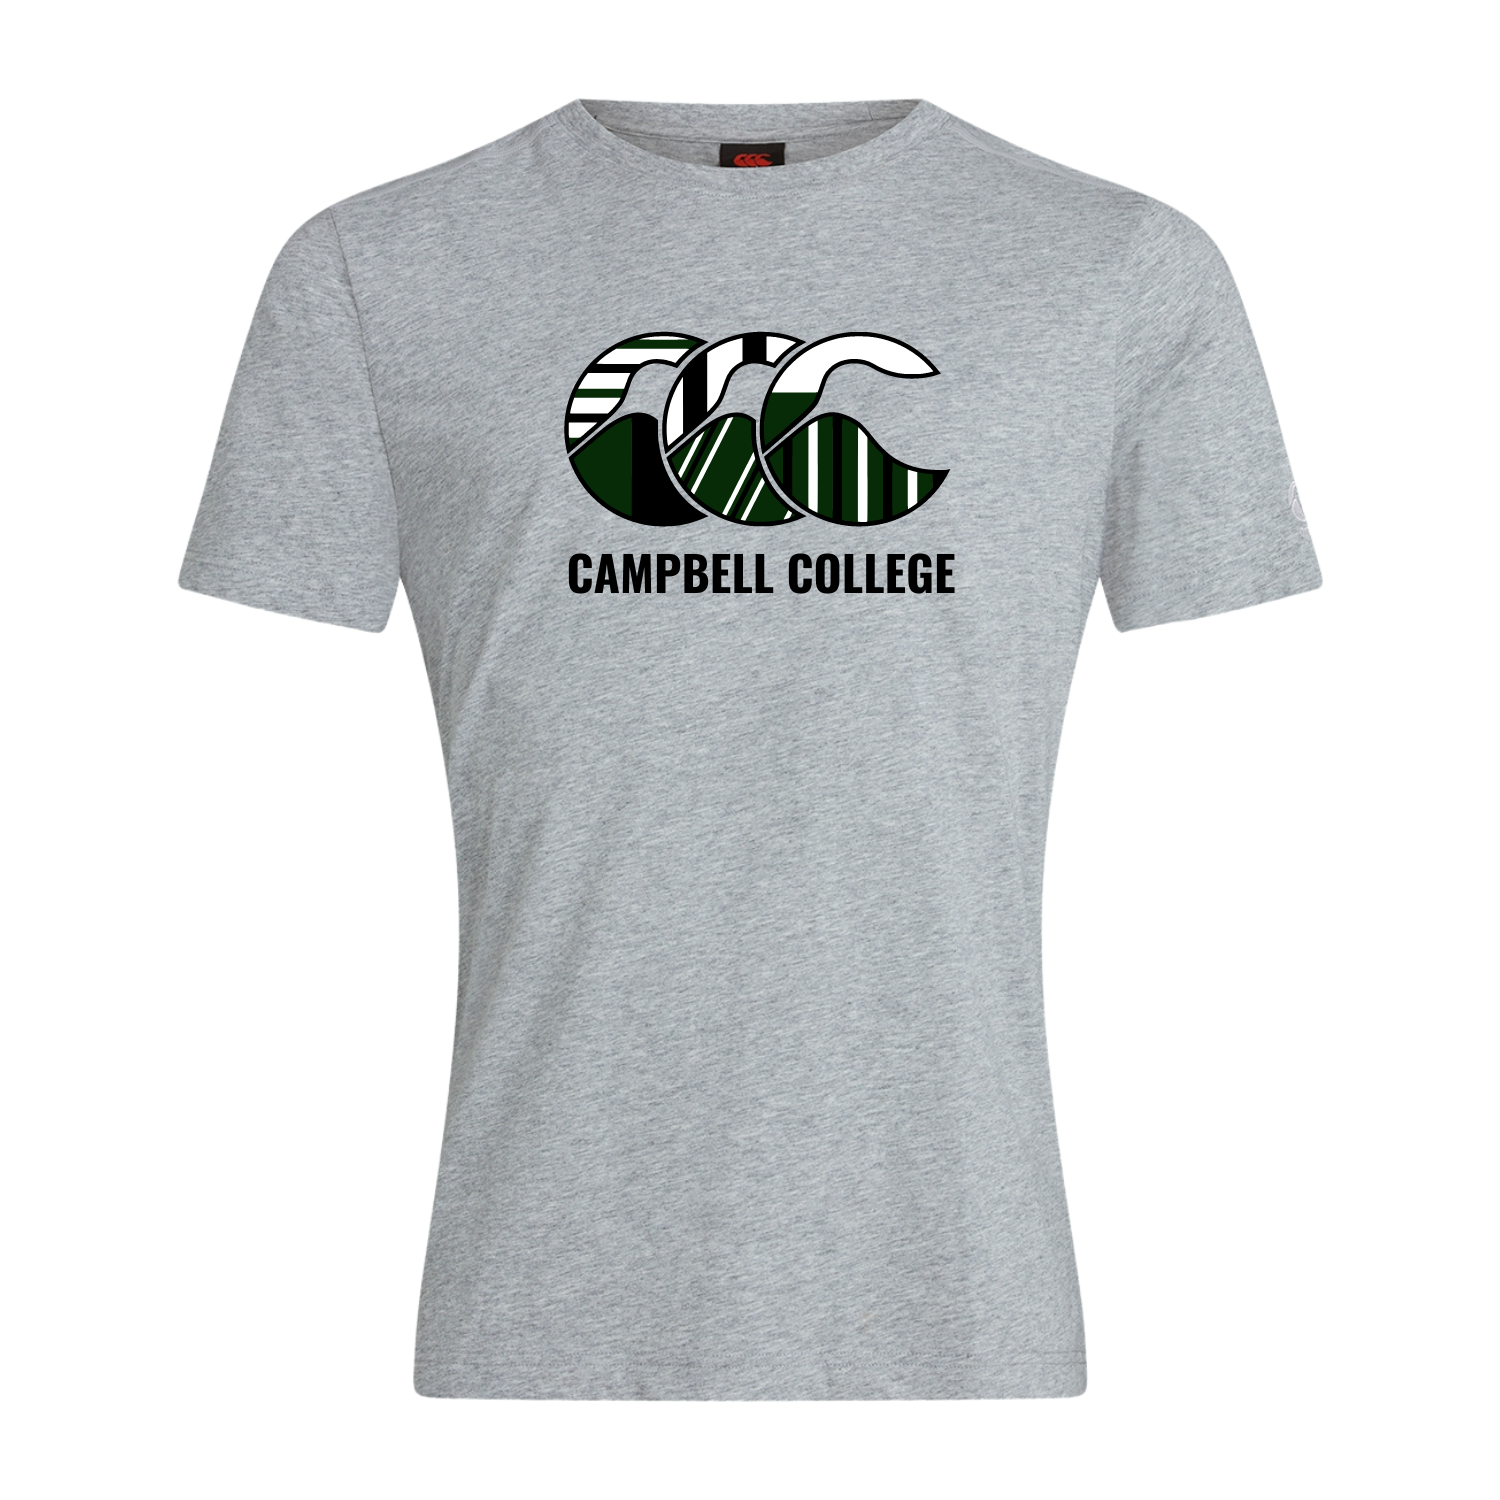 Campbell College - Uglies Tee - Grey